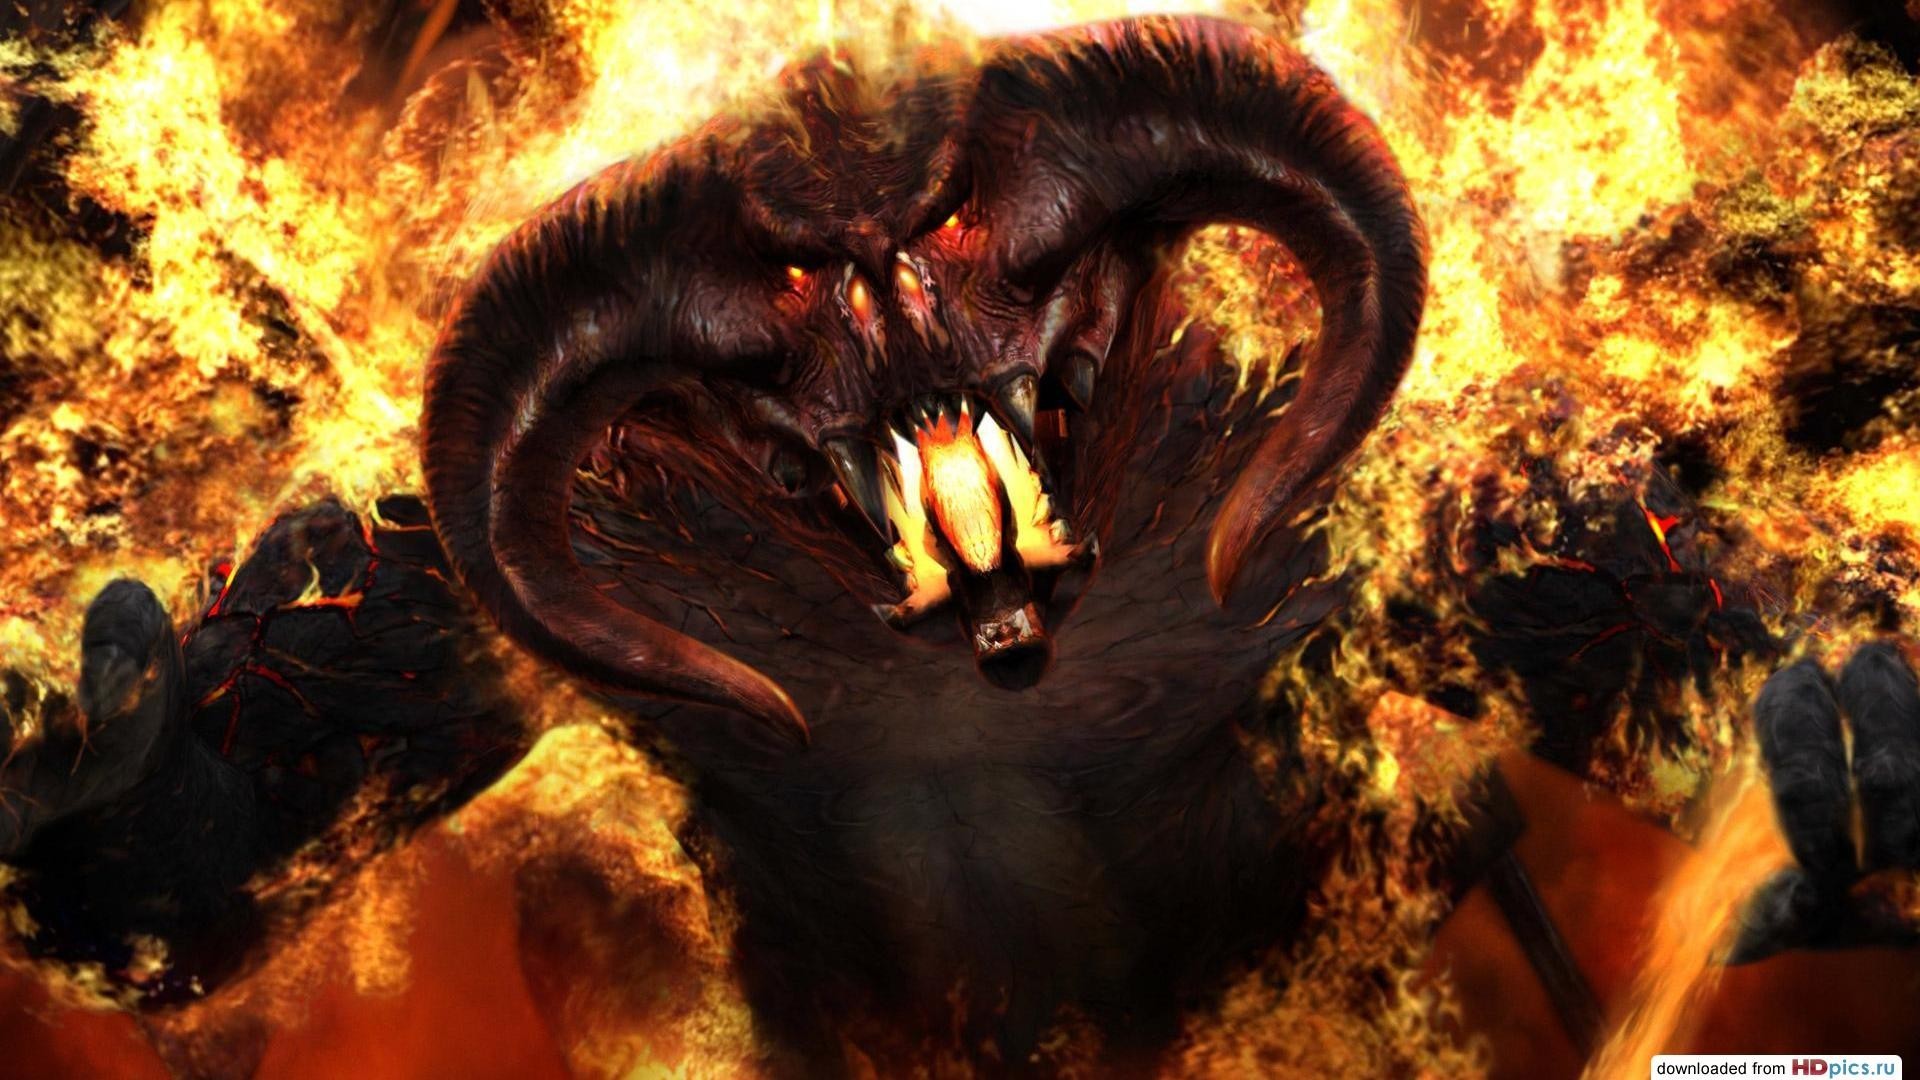 Movies The Lord Of The Rings The Lord Of The Rings The Fellowship Of The Ring Balrog 1920x1080